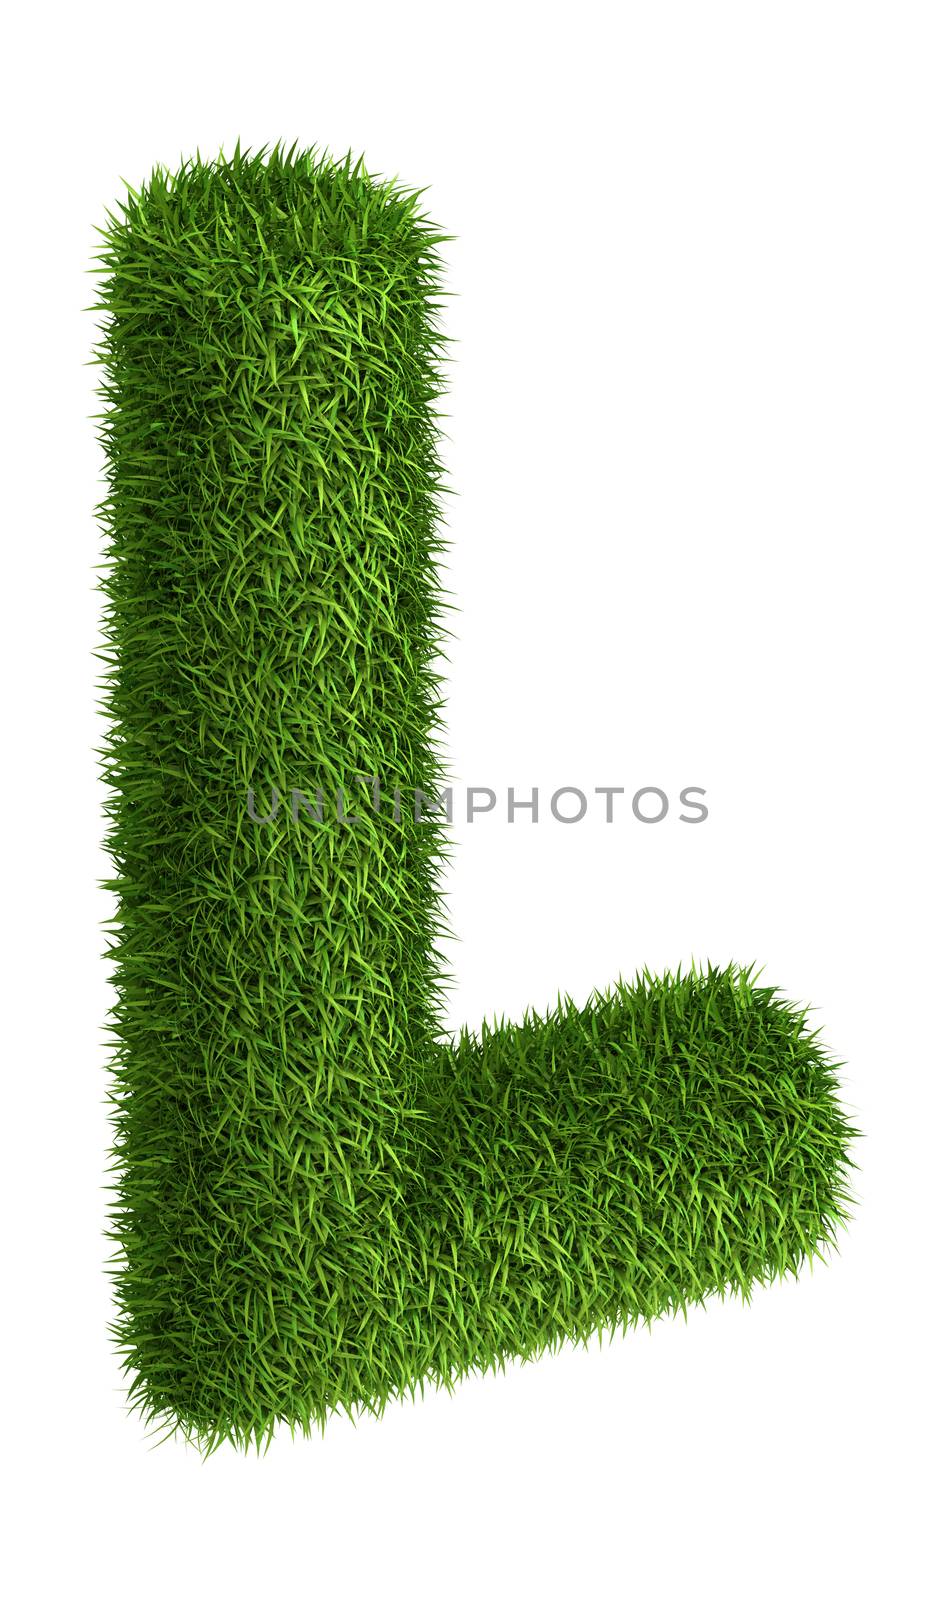 3D Letter L photo realistic isometric projection grass ecology theme on white